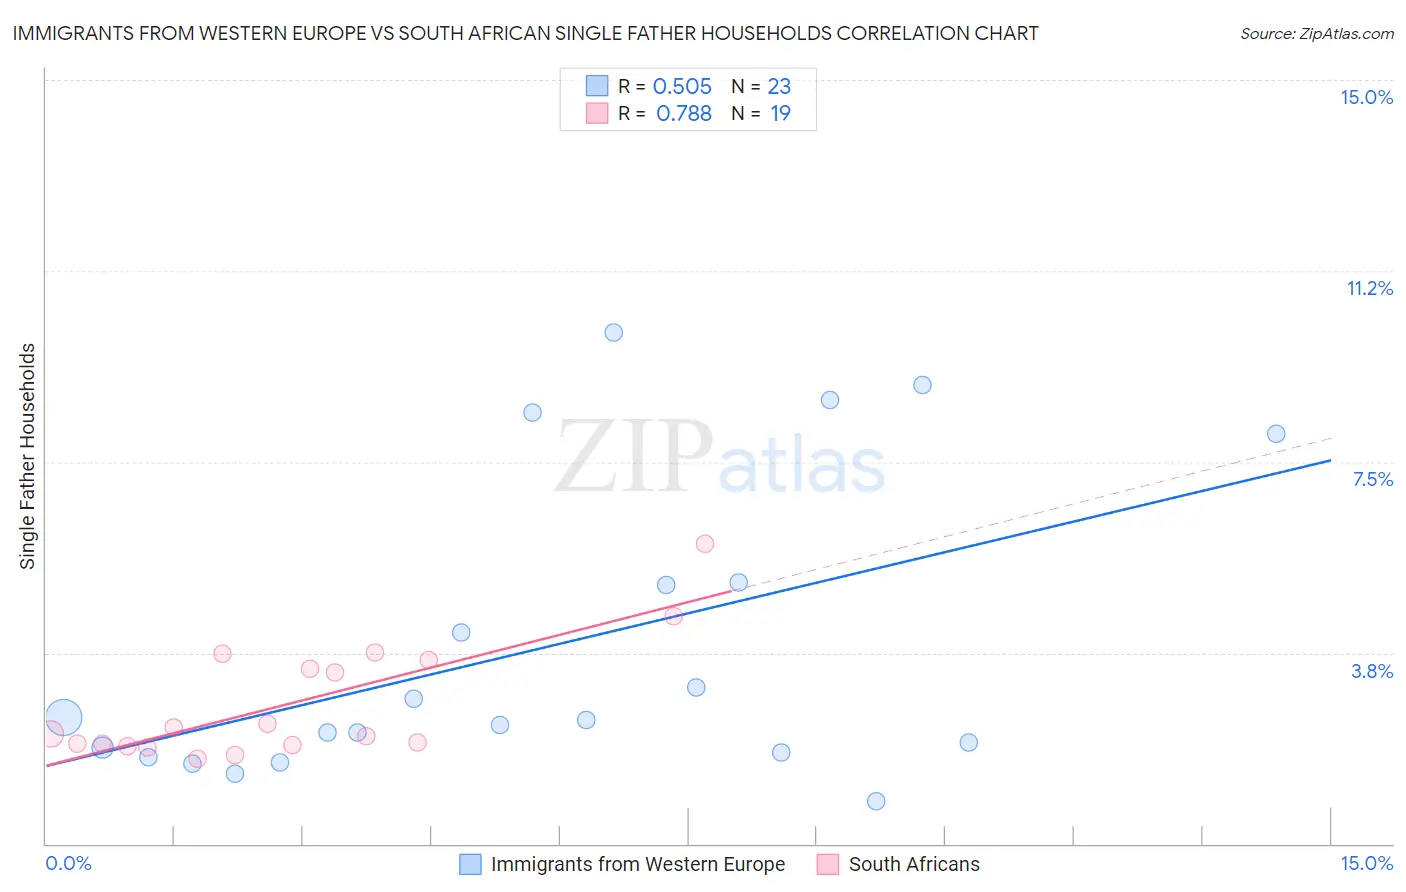 Immigrants from Western Europe vs South African Single Father Households